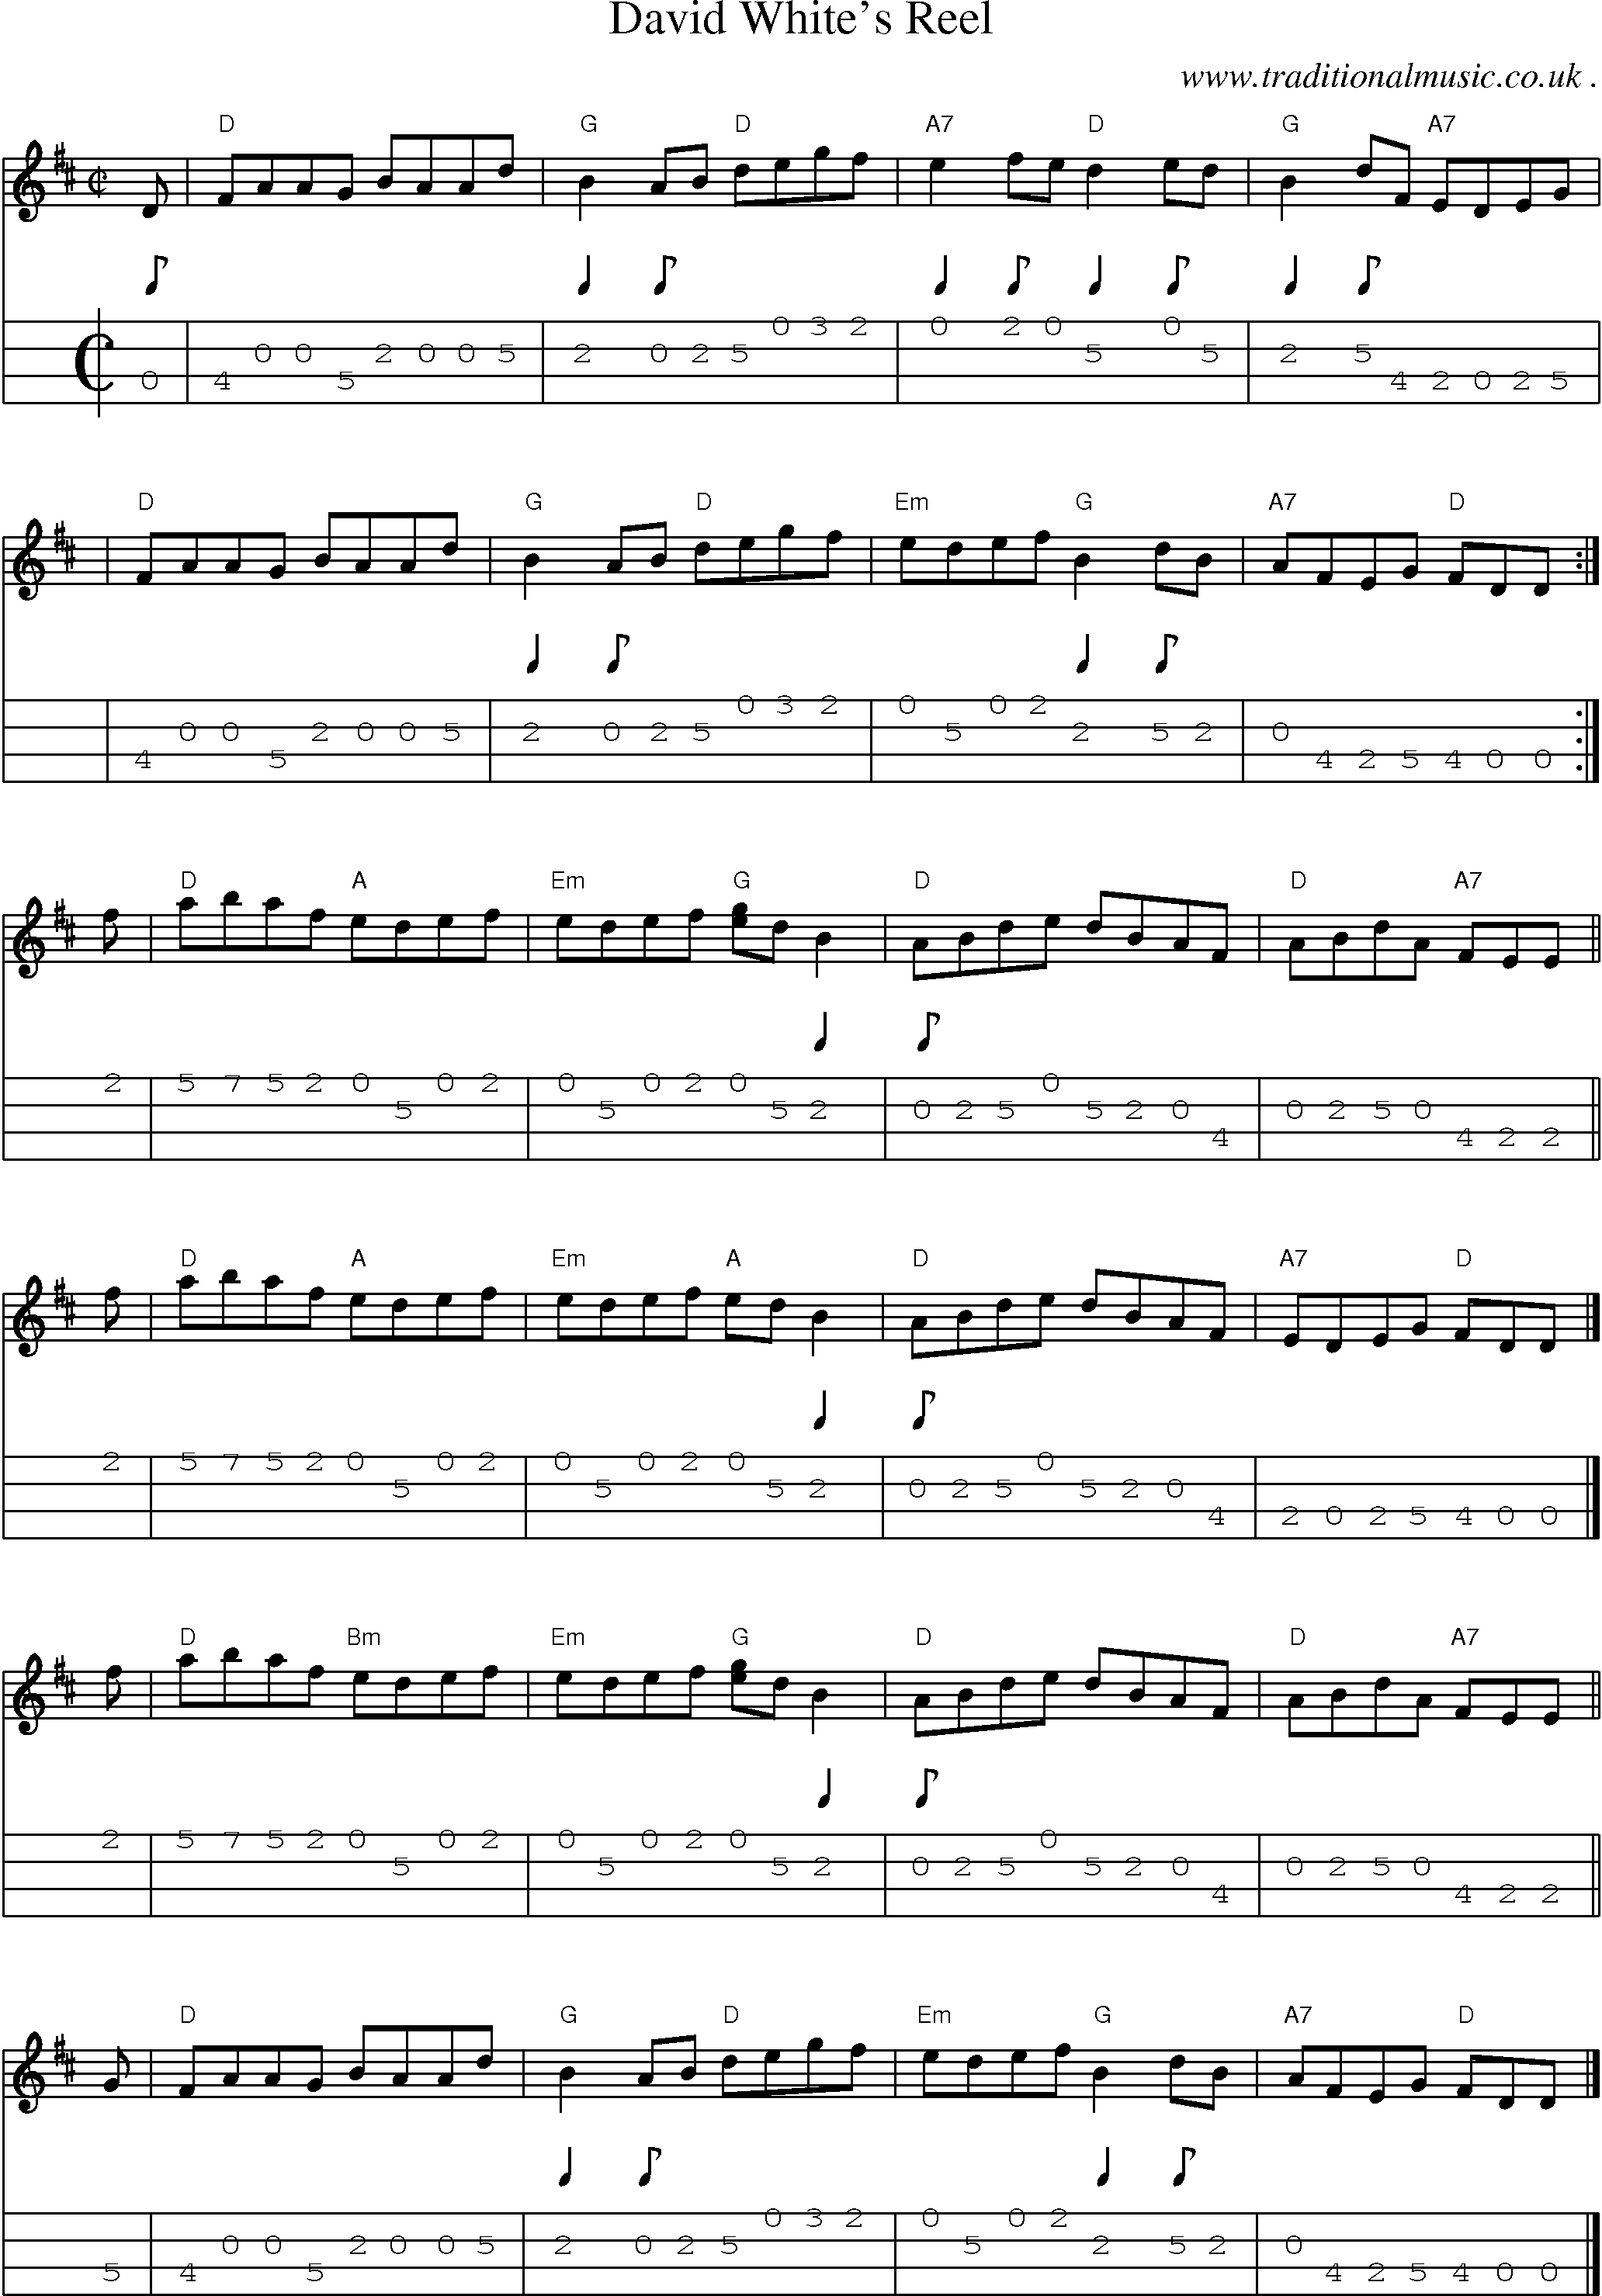 Sheet-music  score, Chords and Mandolin Tabs for David Whites Reel